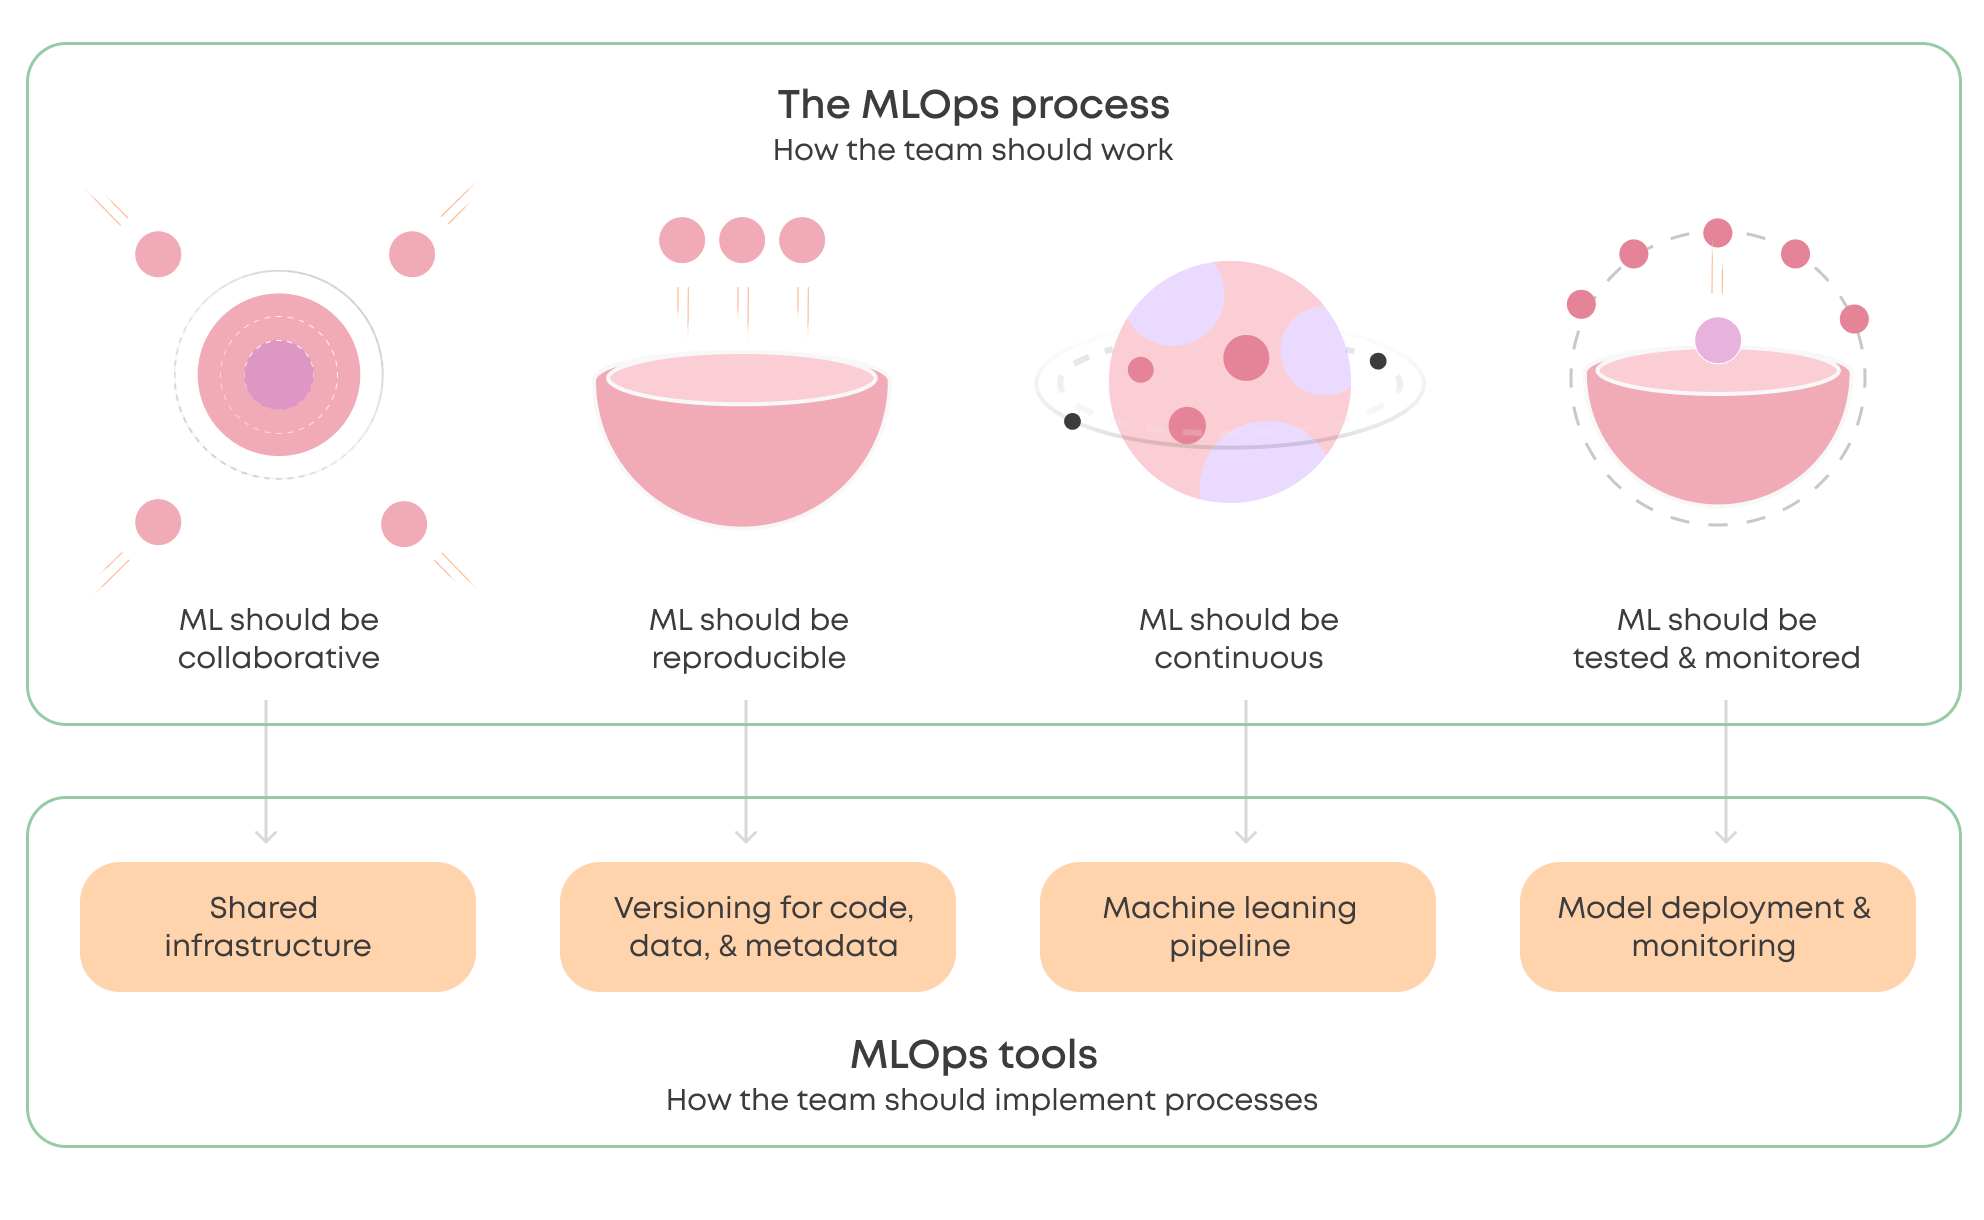 A picture representing key elements of the MLOps process leading to the selection of the MLOps tools.